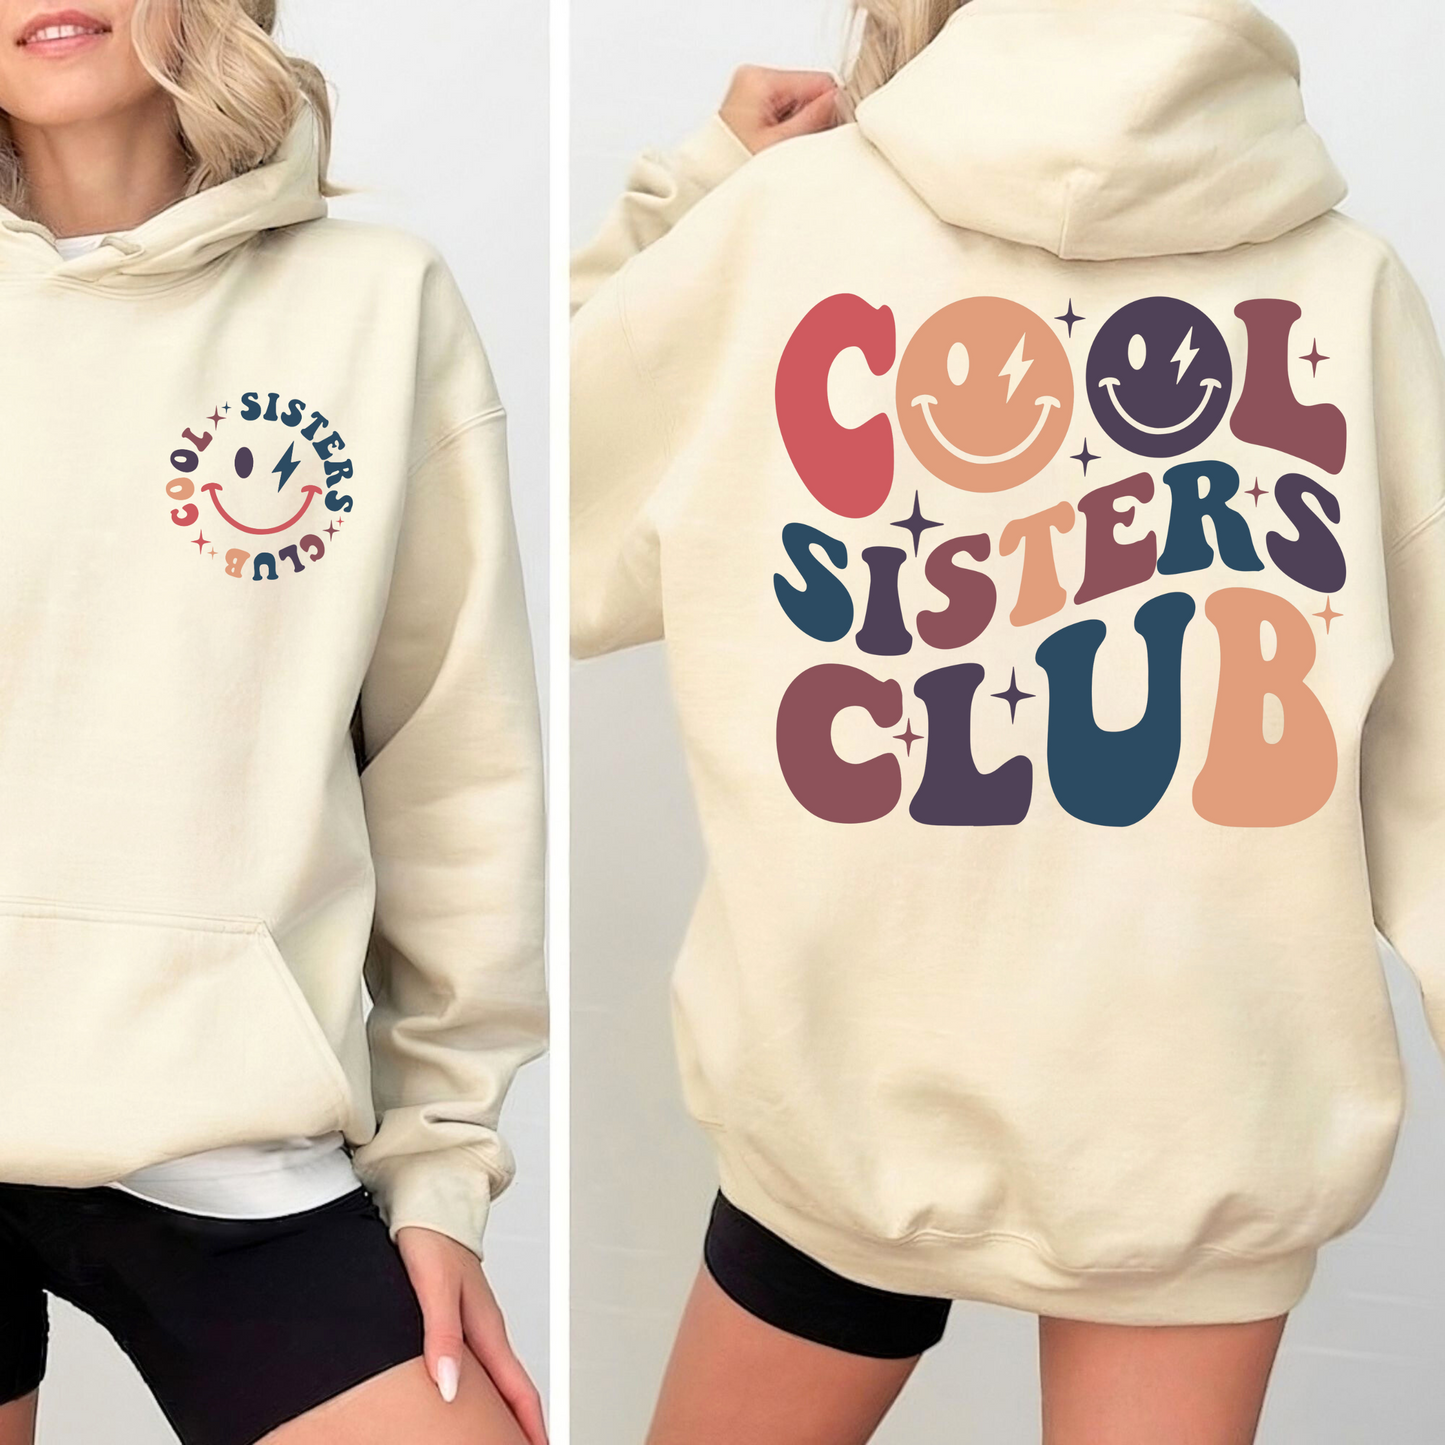 Cool Sisters Club - Bond of Friendship & Fun Unveiled